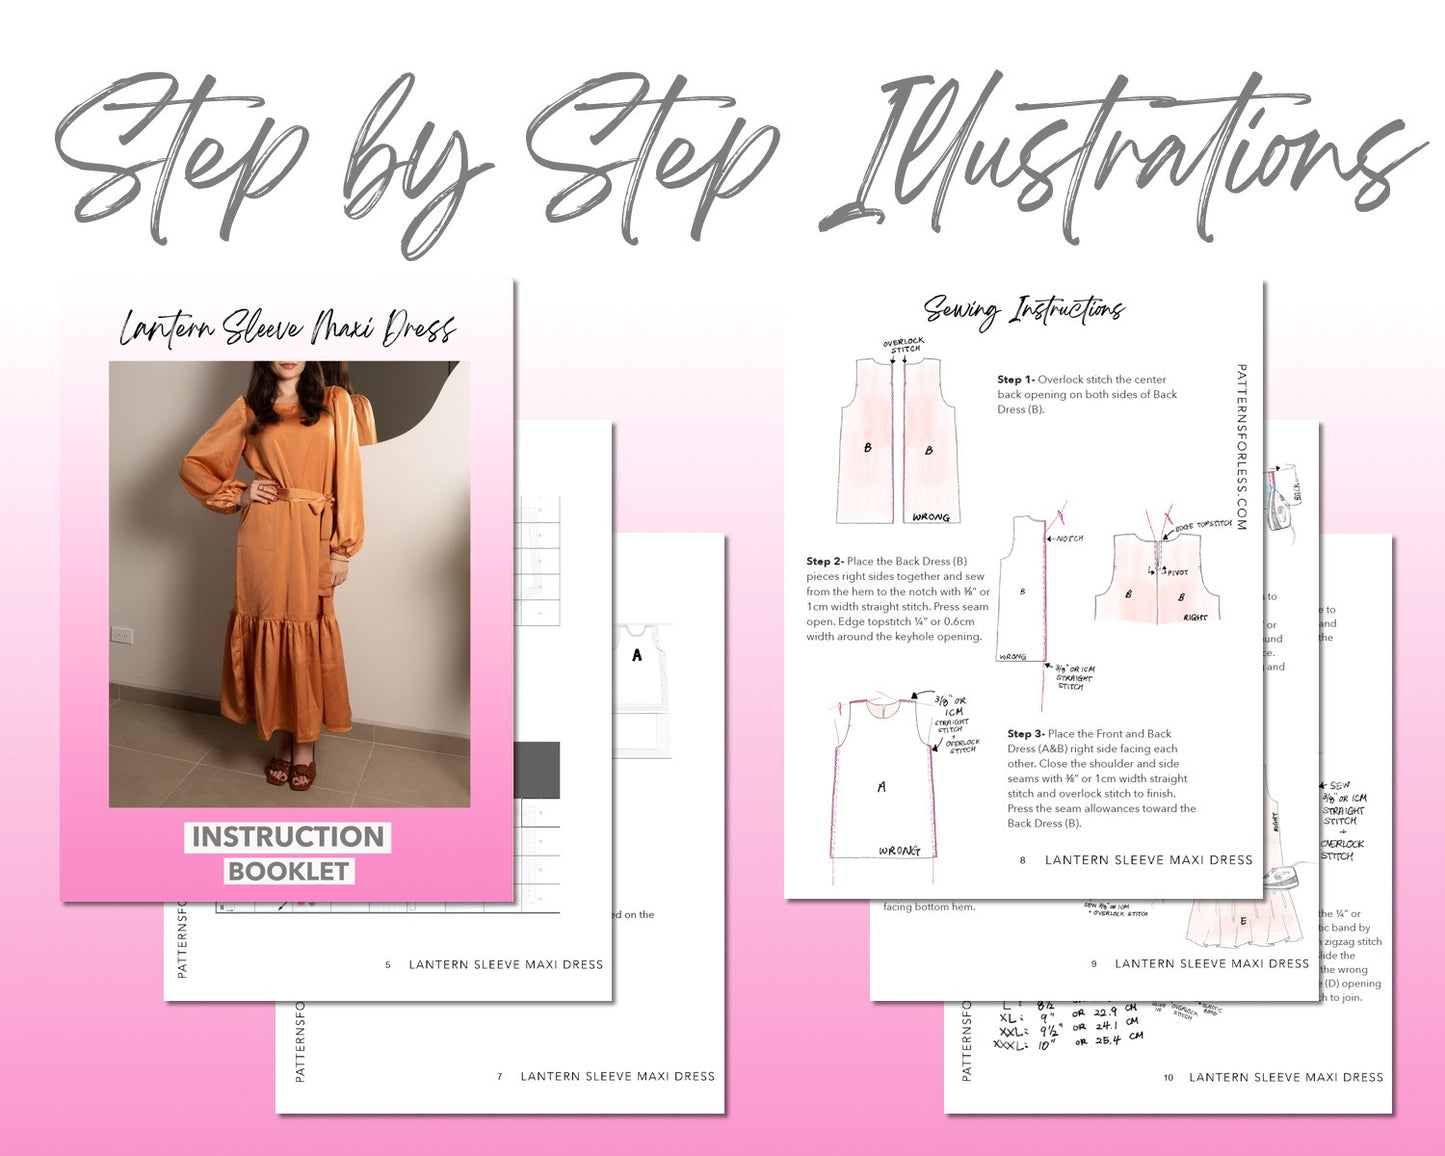 Lantern Sleeve Maxi Dress sewing pattern step by step illustrations.